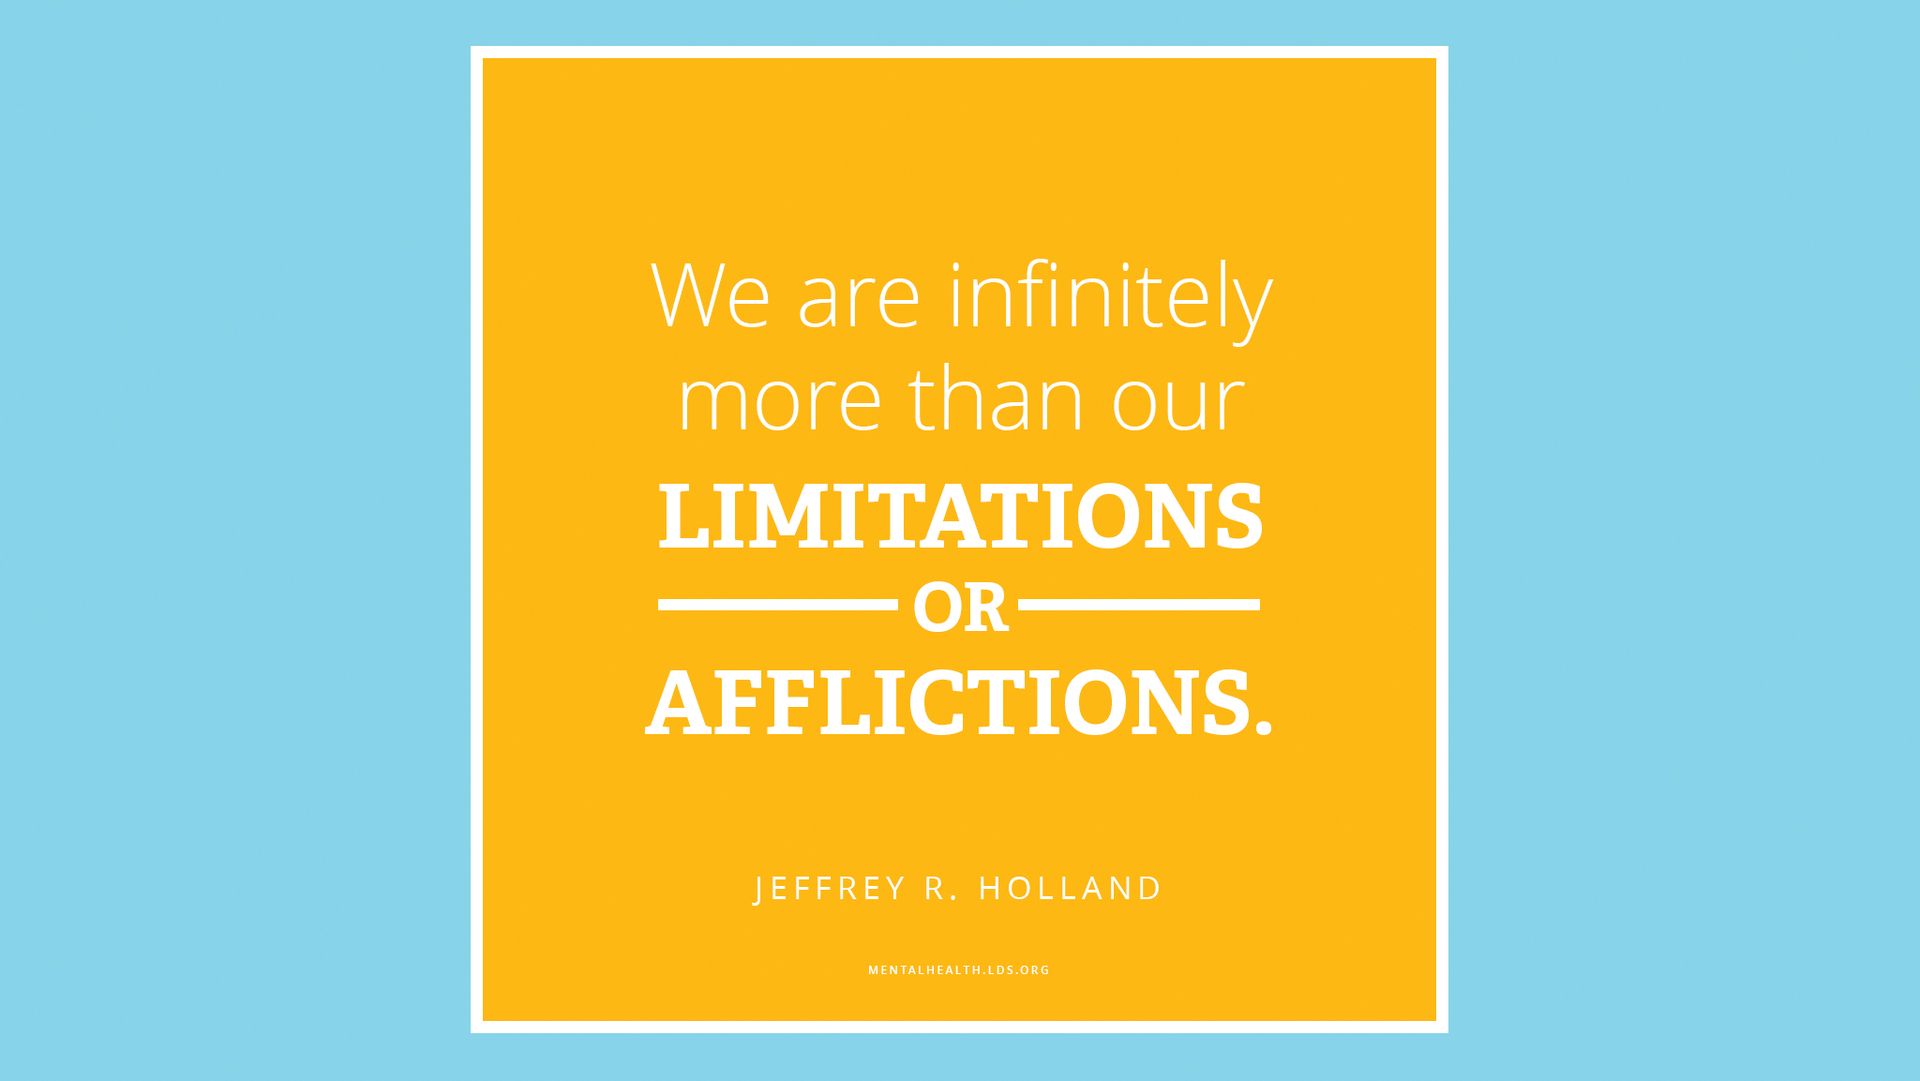 “We are infinitely more than our limitations or afflictions.”—Elder Jeffrey R. Holland, “Like a Broken Vessel”